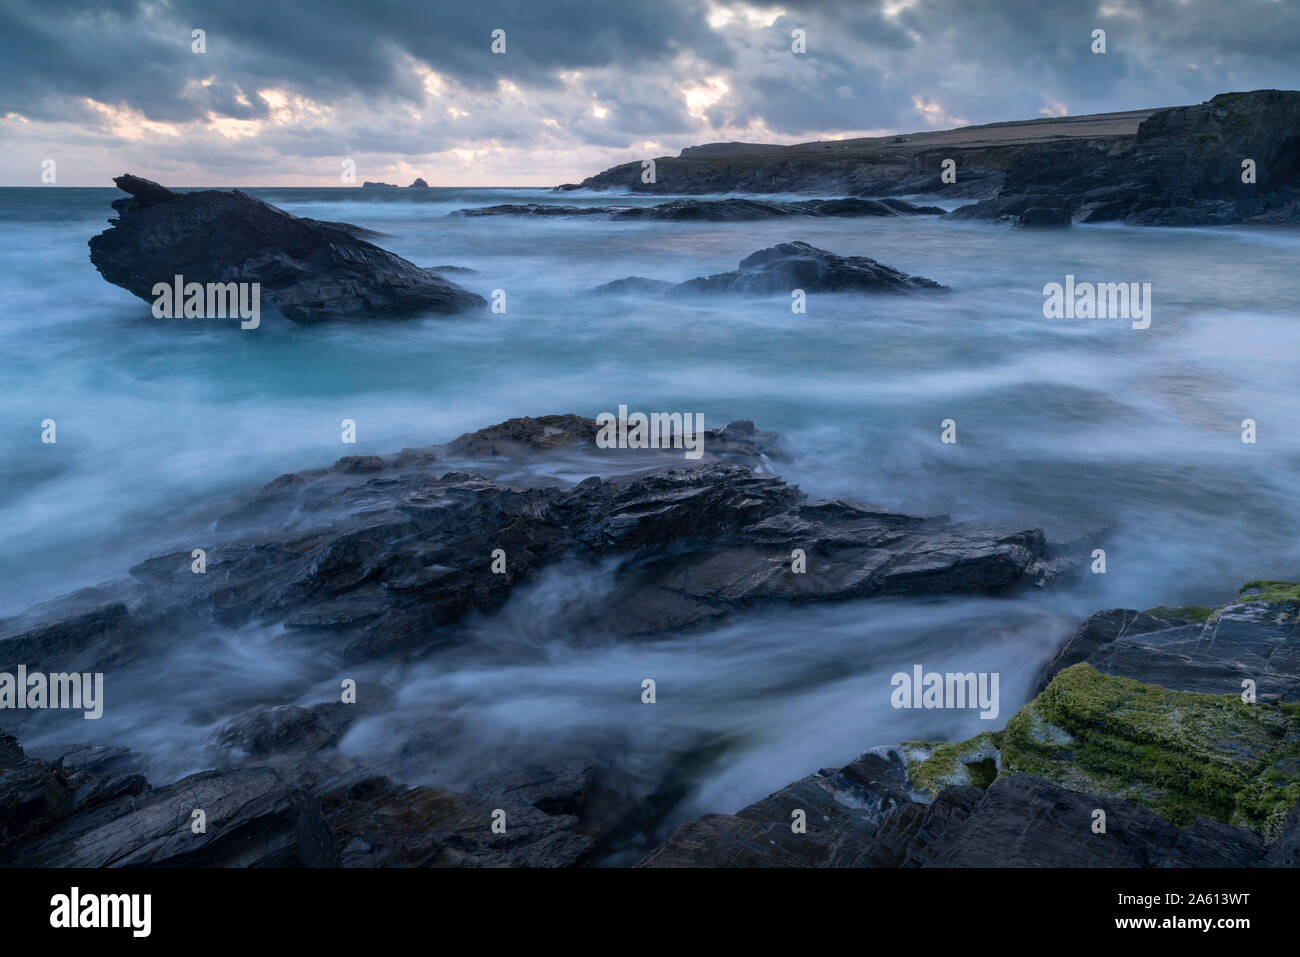 Stormy evening at Boobys Bay on the North Coast of Cornwall, England, United Kingdom, Europe Stock Photo